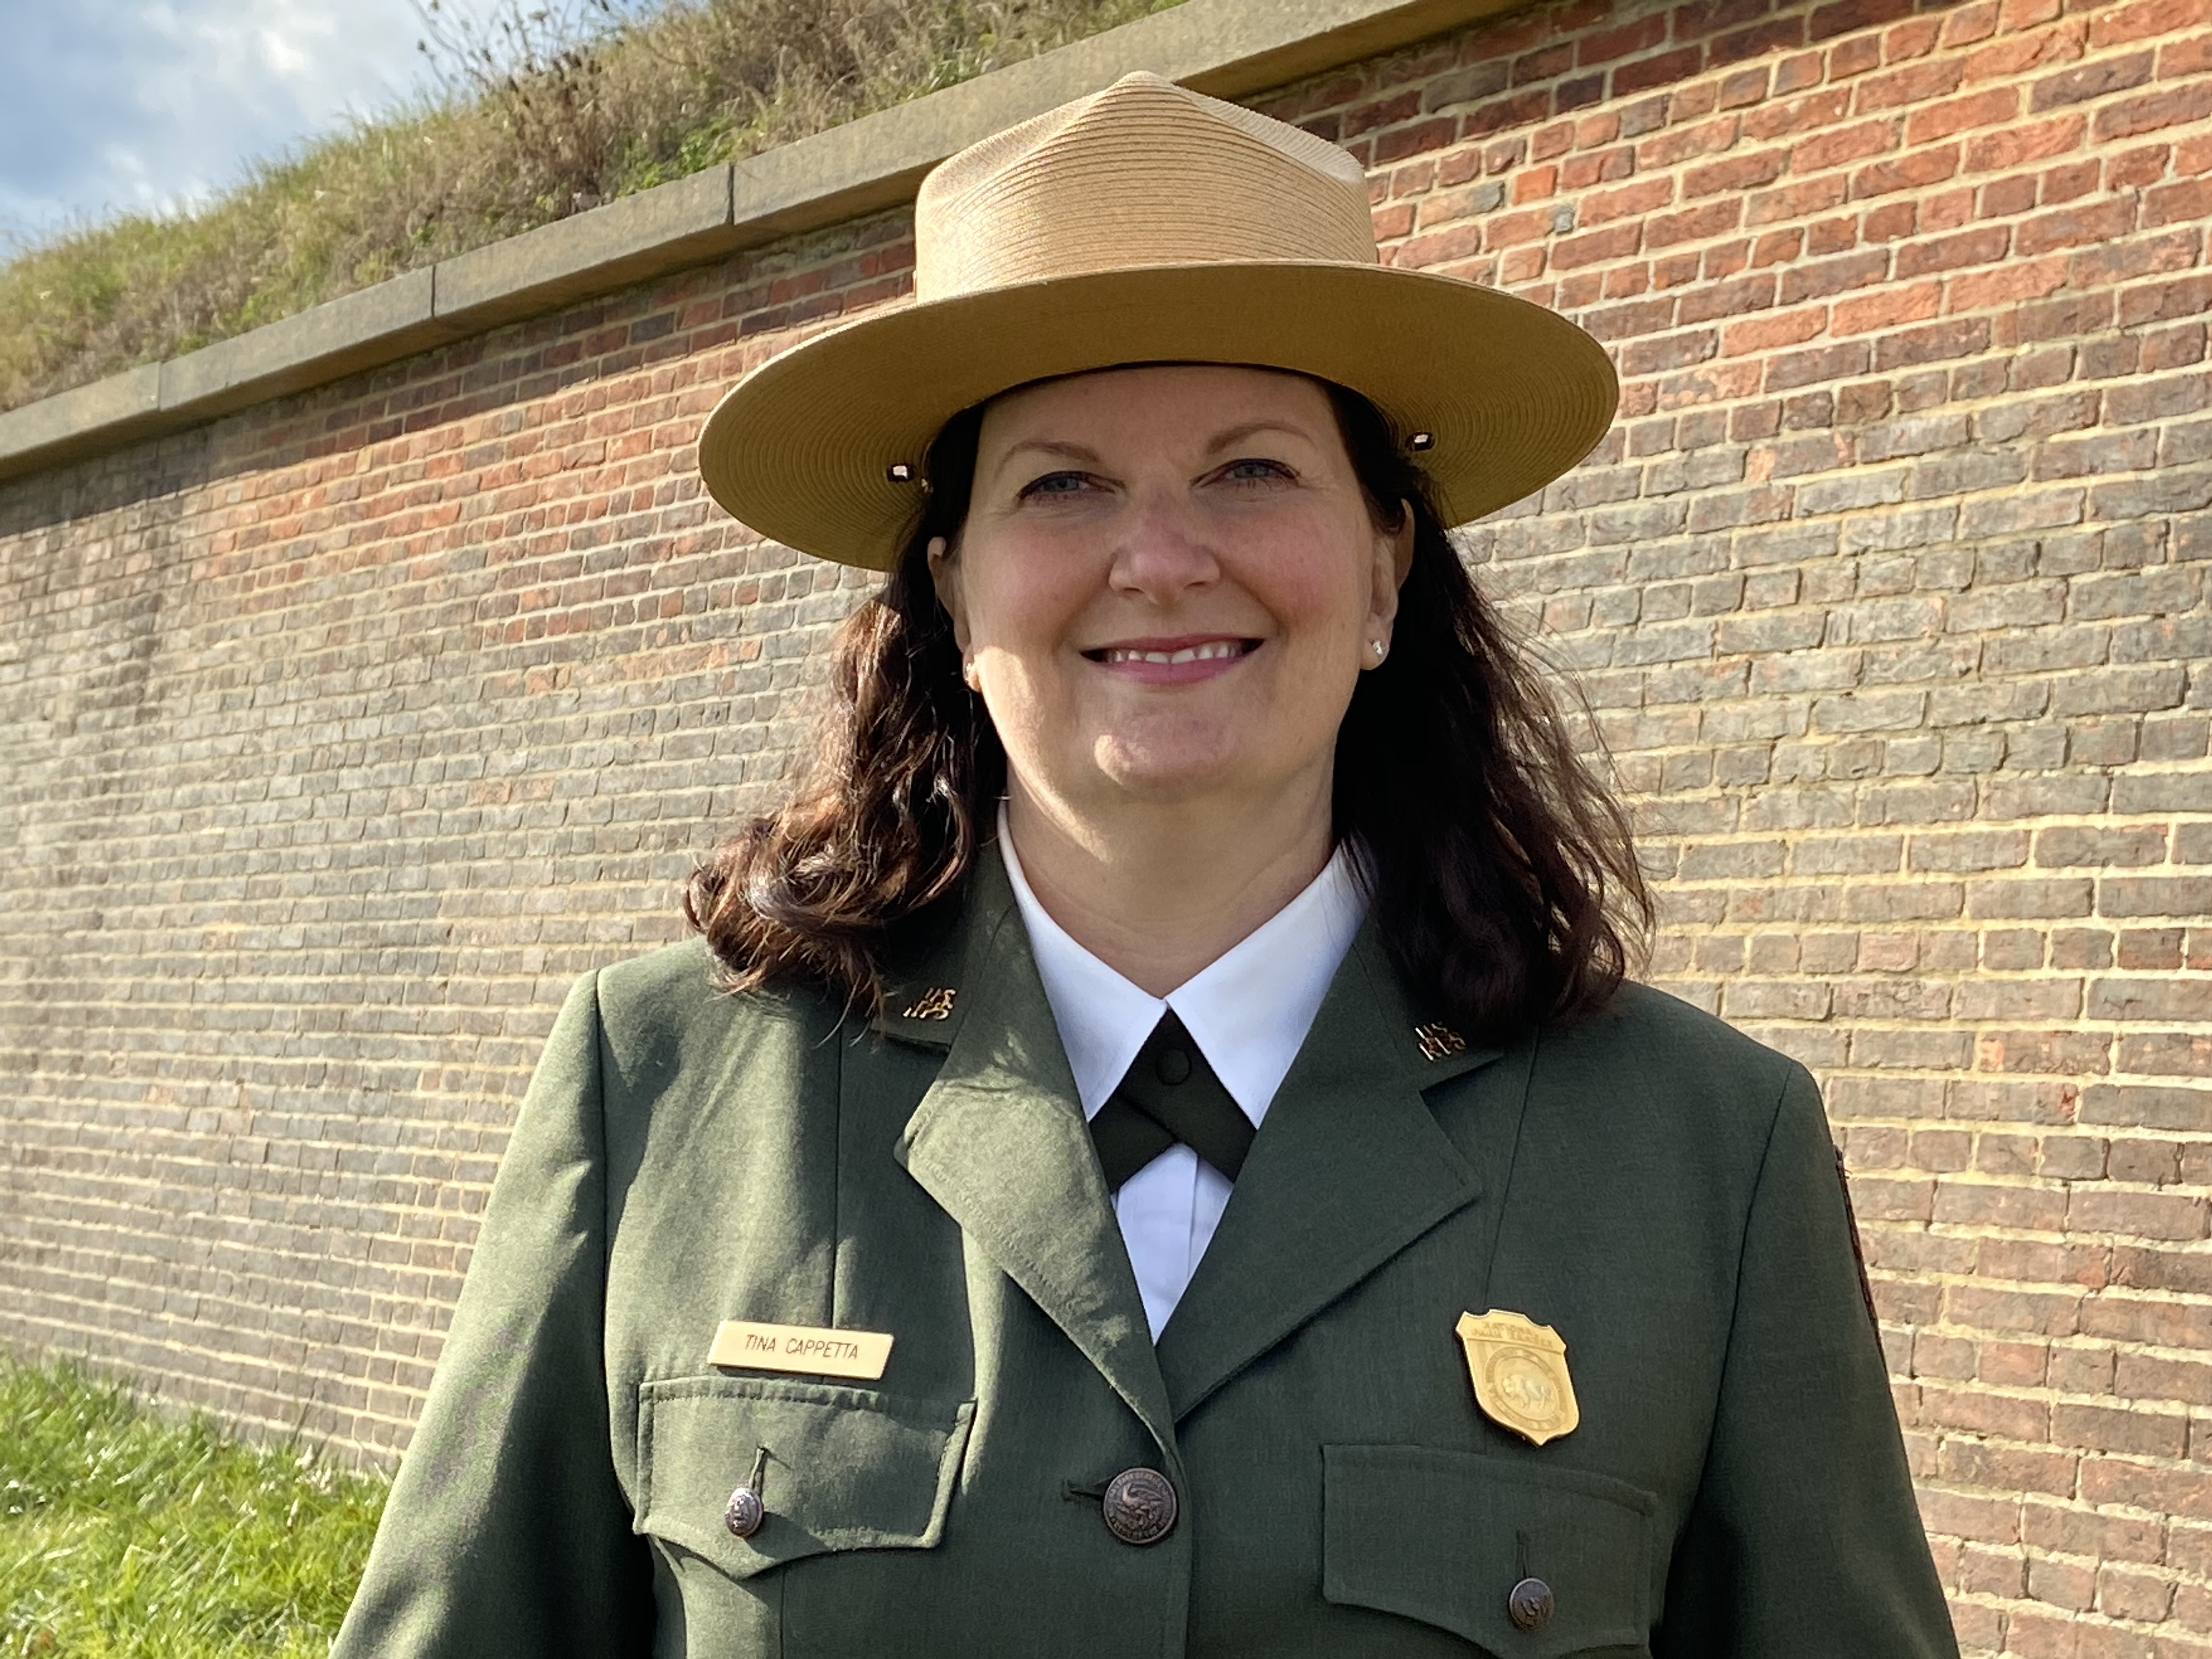 photo of Tina Cappetta in her National Park Service uniform